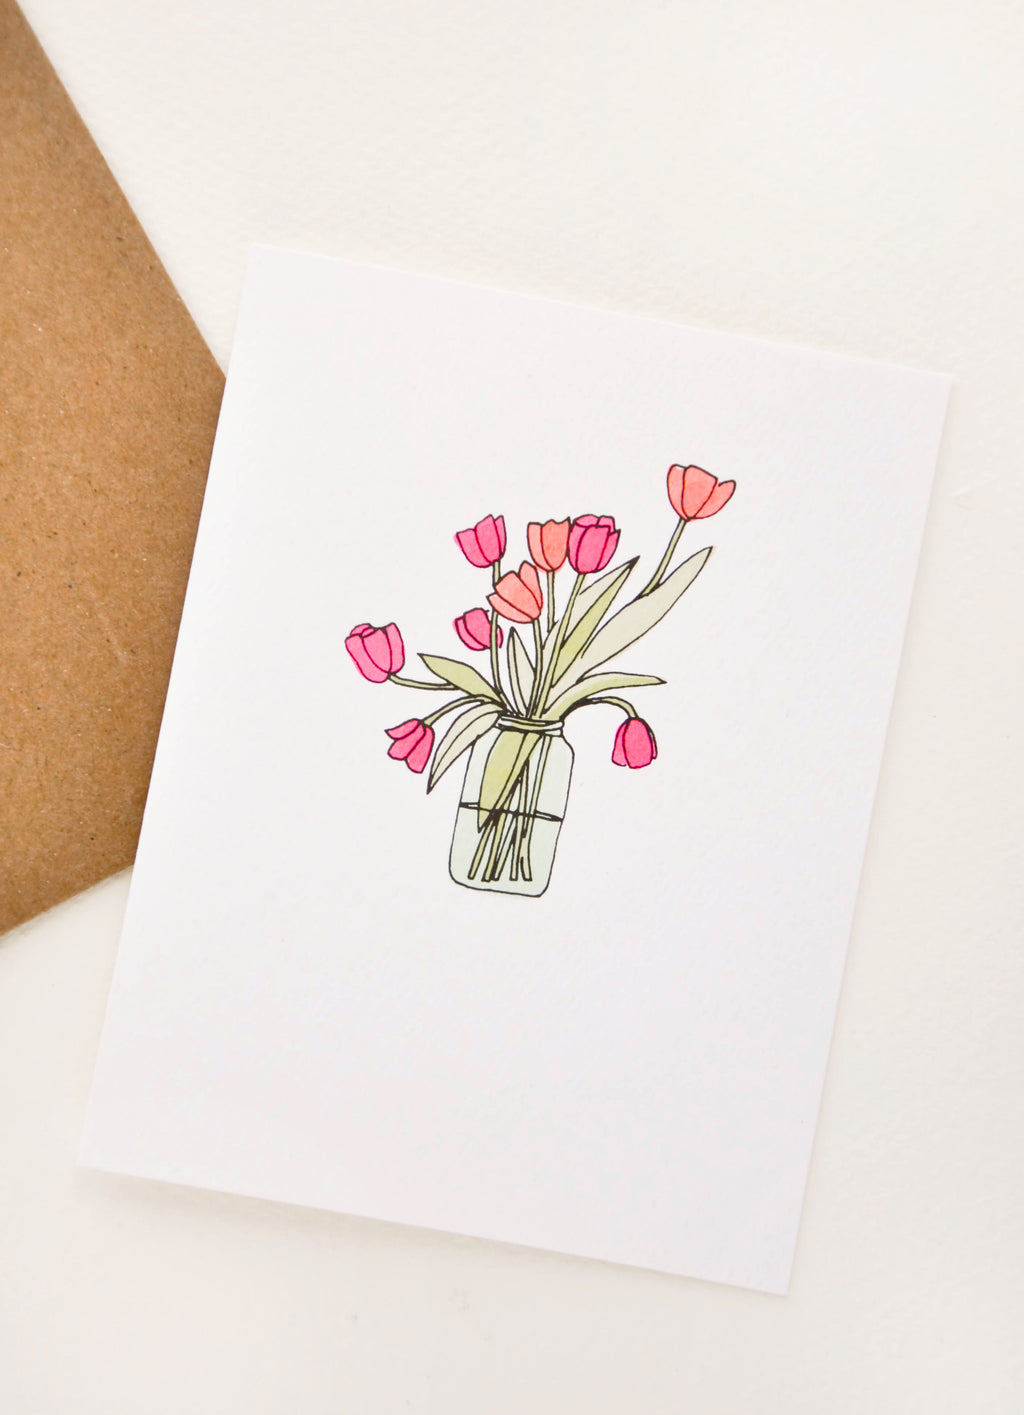 1: A greeting card with illustration of tulips in a glass vase.